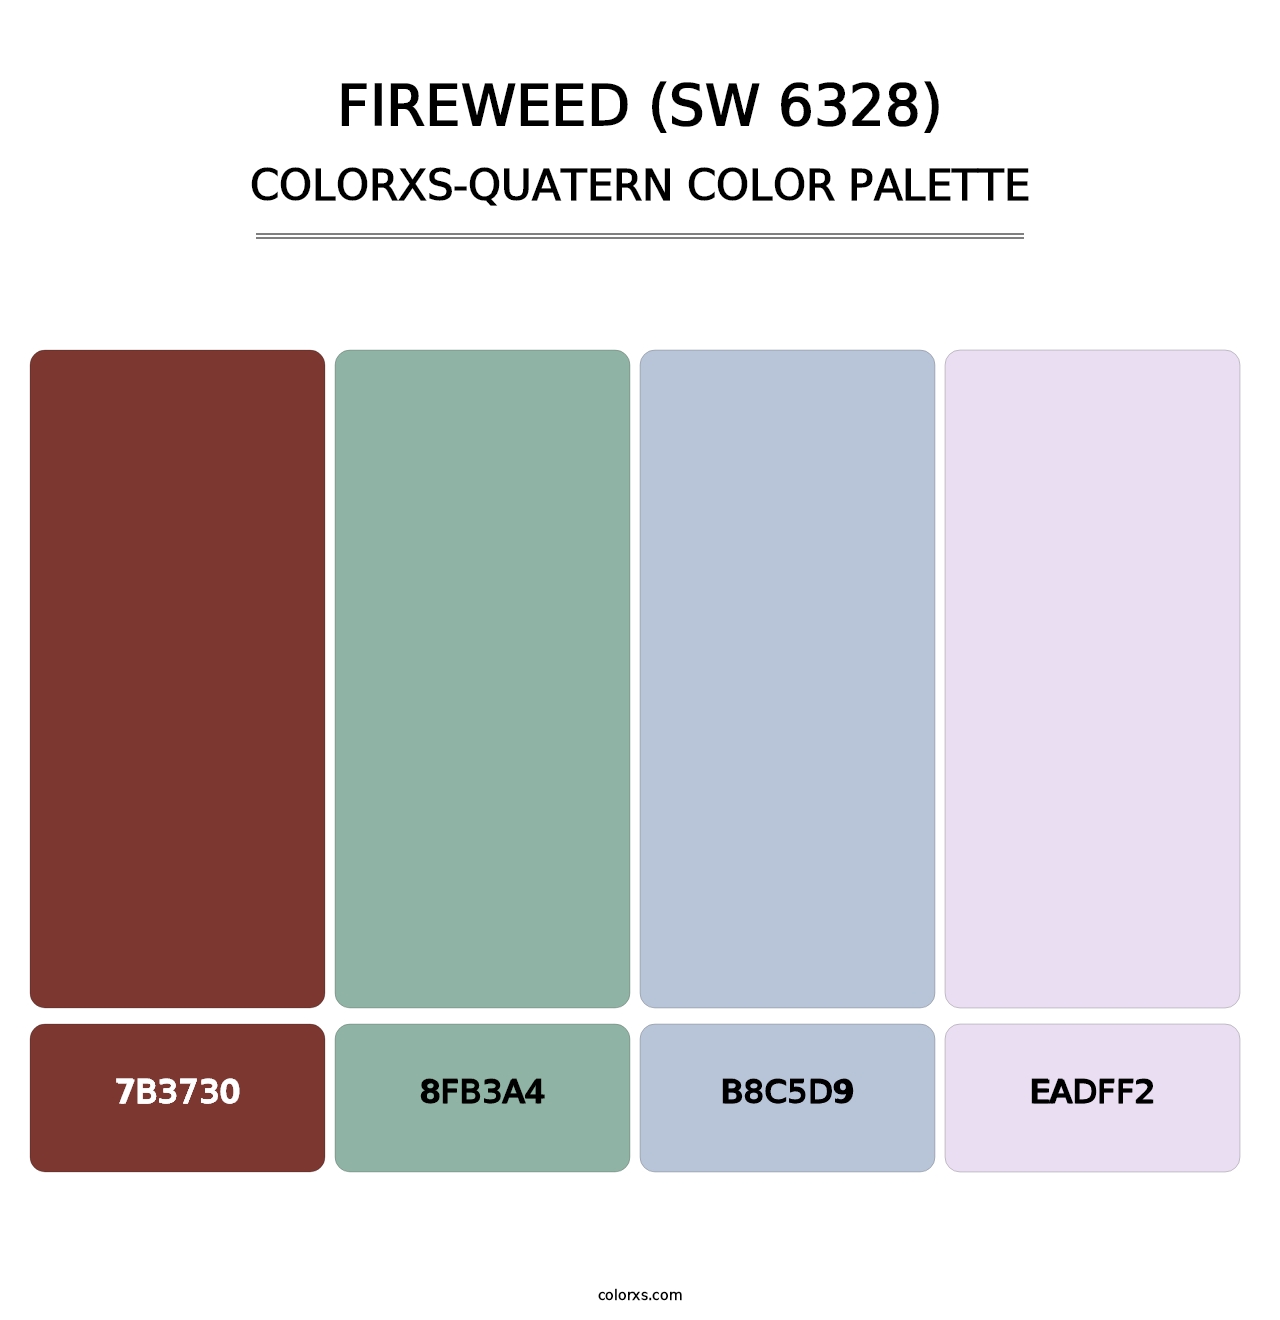 Fireweed (SW 6328) - Colorxs Quatern Palette